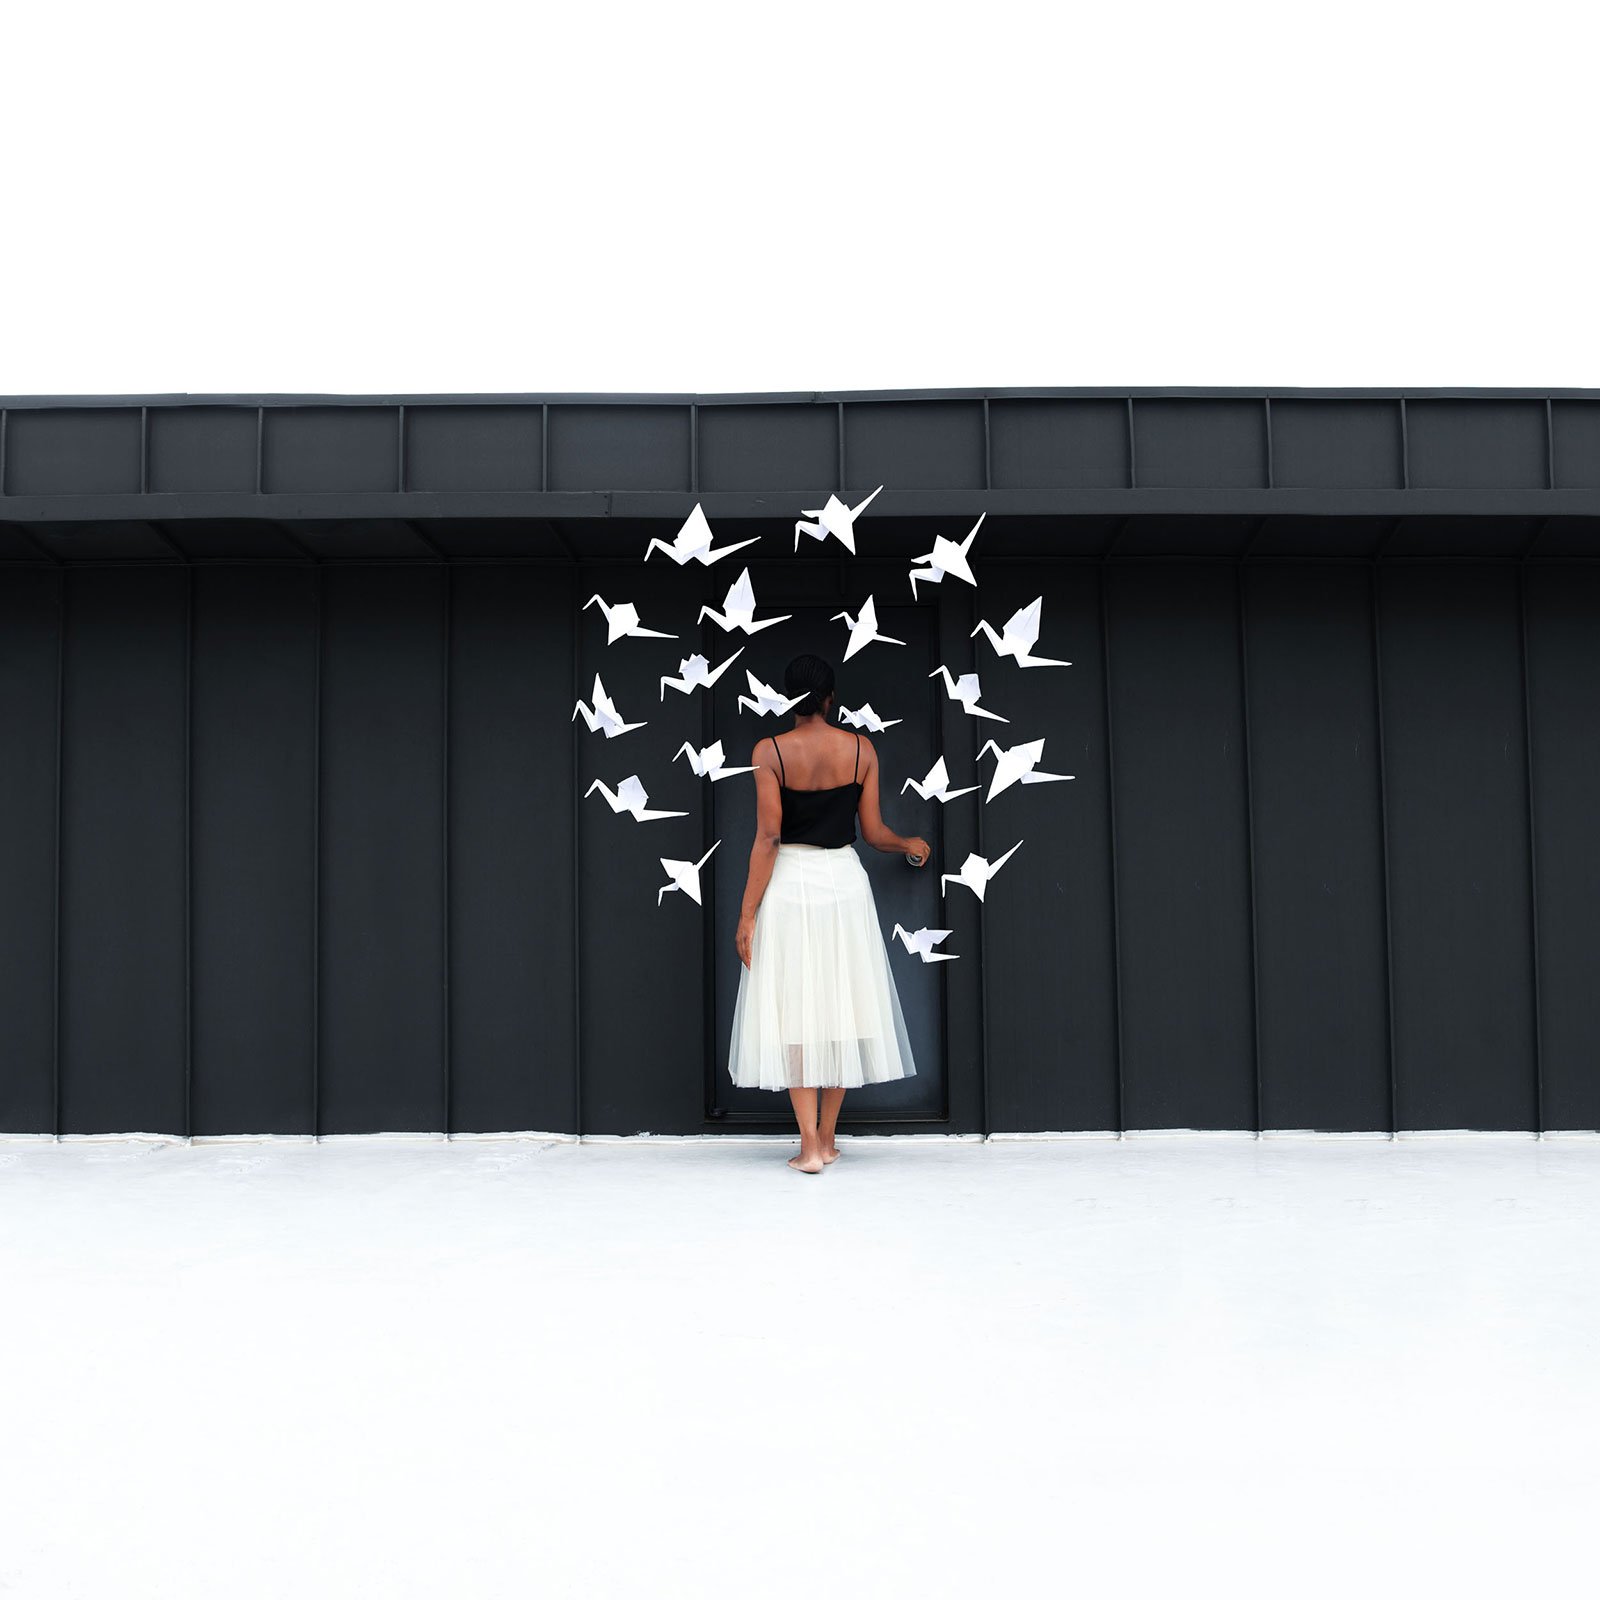 woman with white skirt and black top facing a black wooden background with paper cranes floating in a circle above